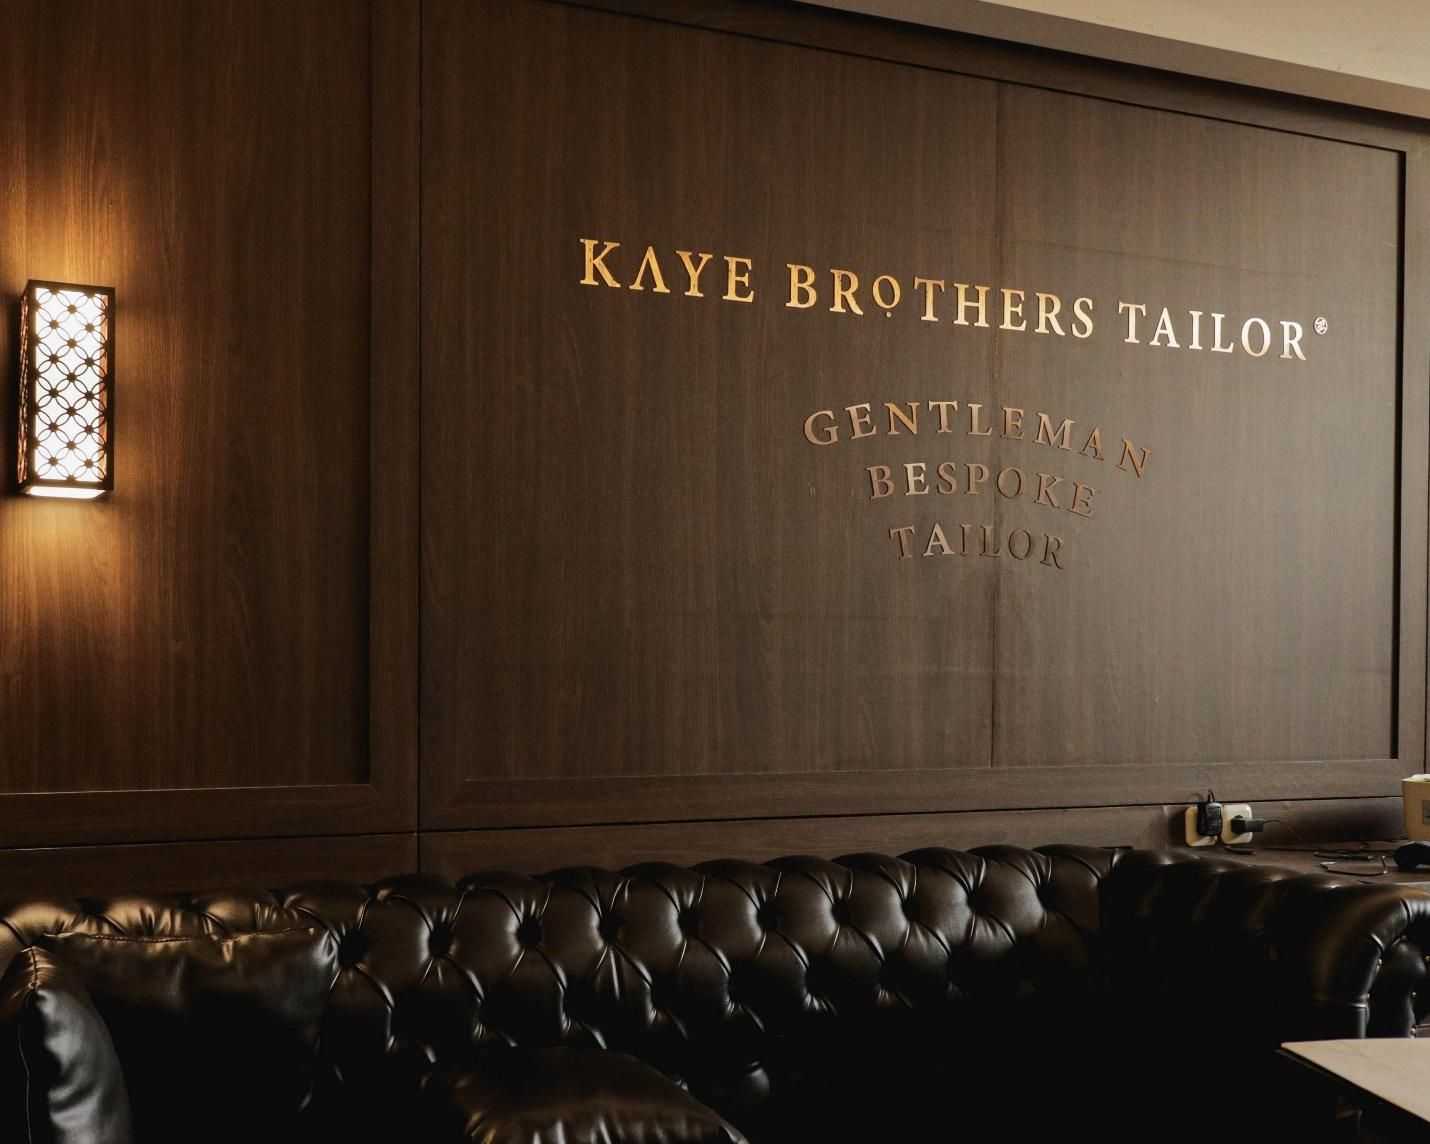 Kaye Brothers Tailor